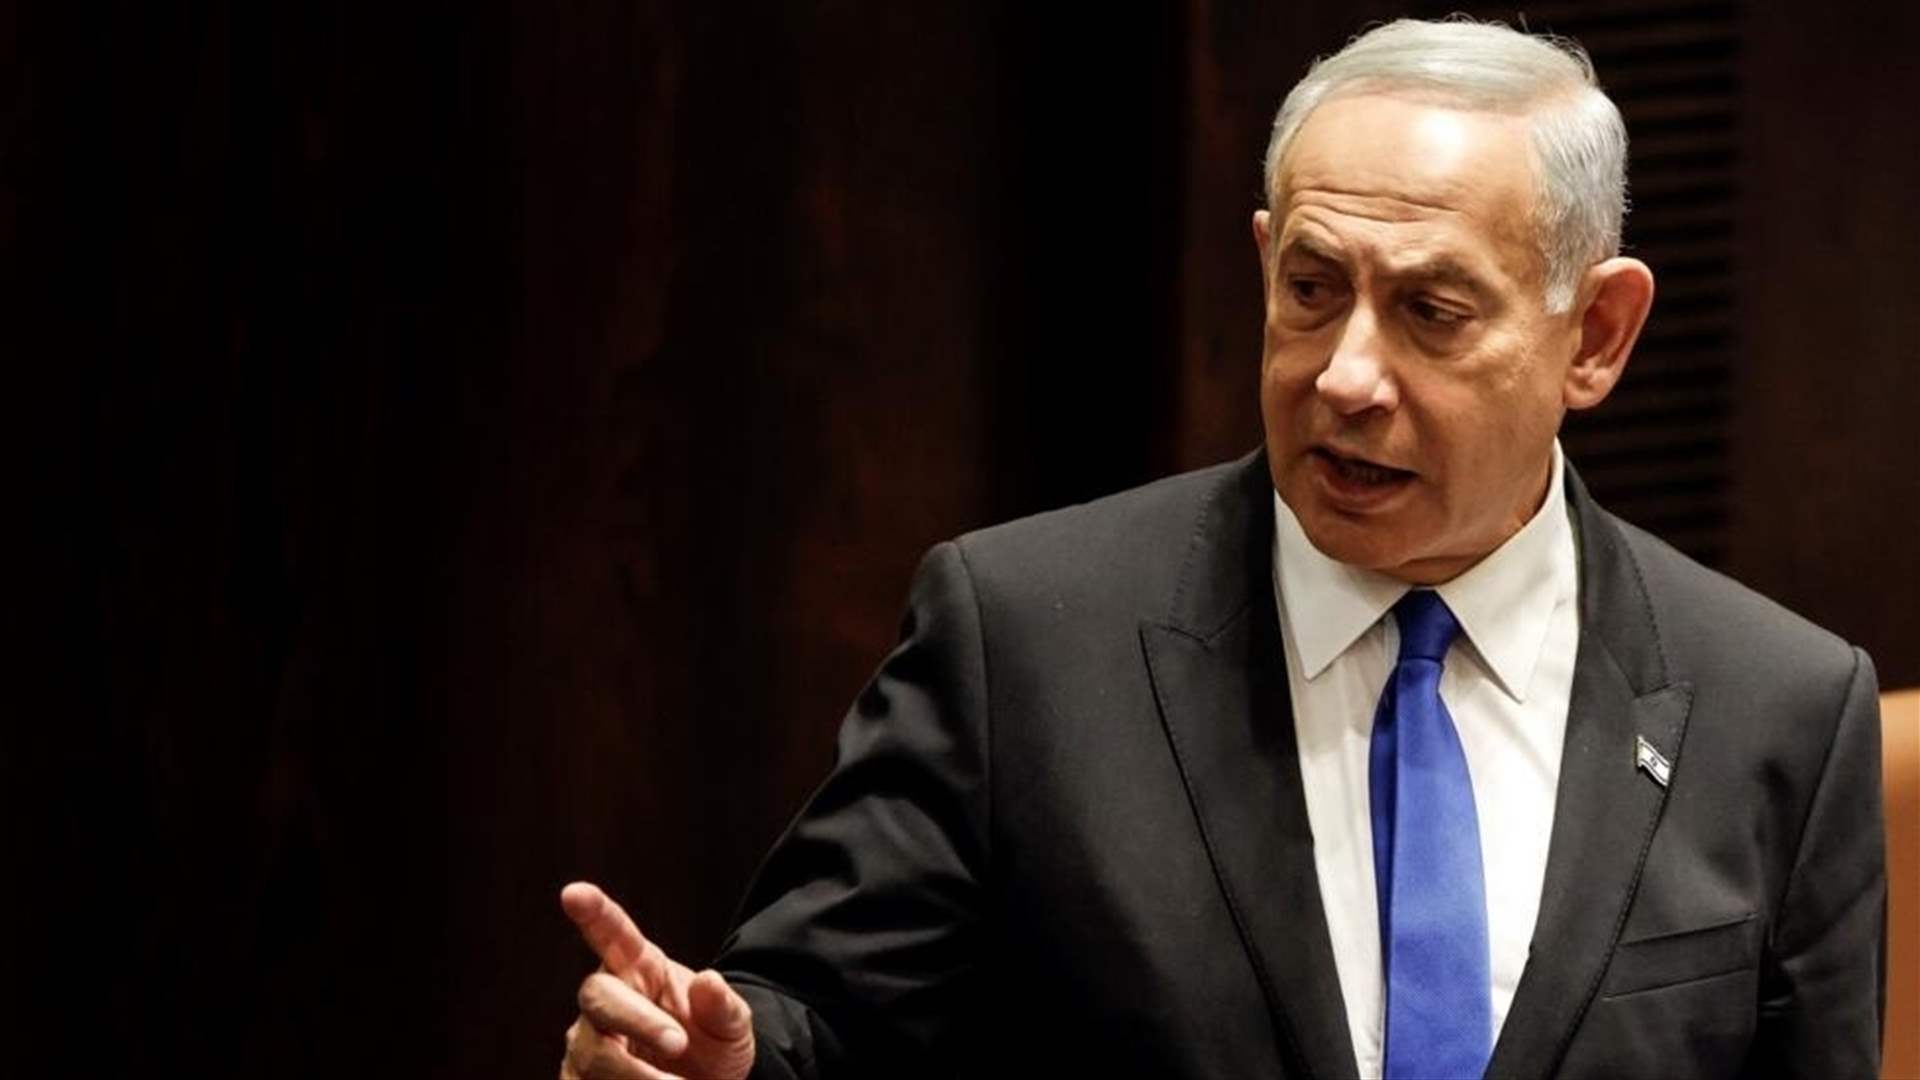 Israeli Prime Minister vows to explore &quot;all options&quot; to secure hostages&#39; release